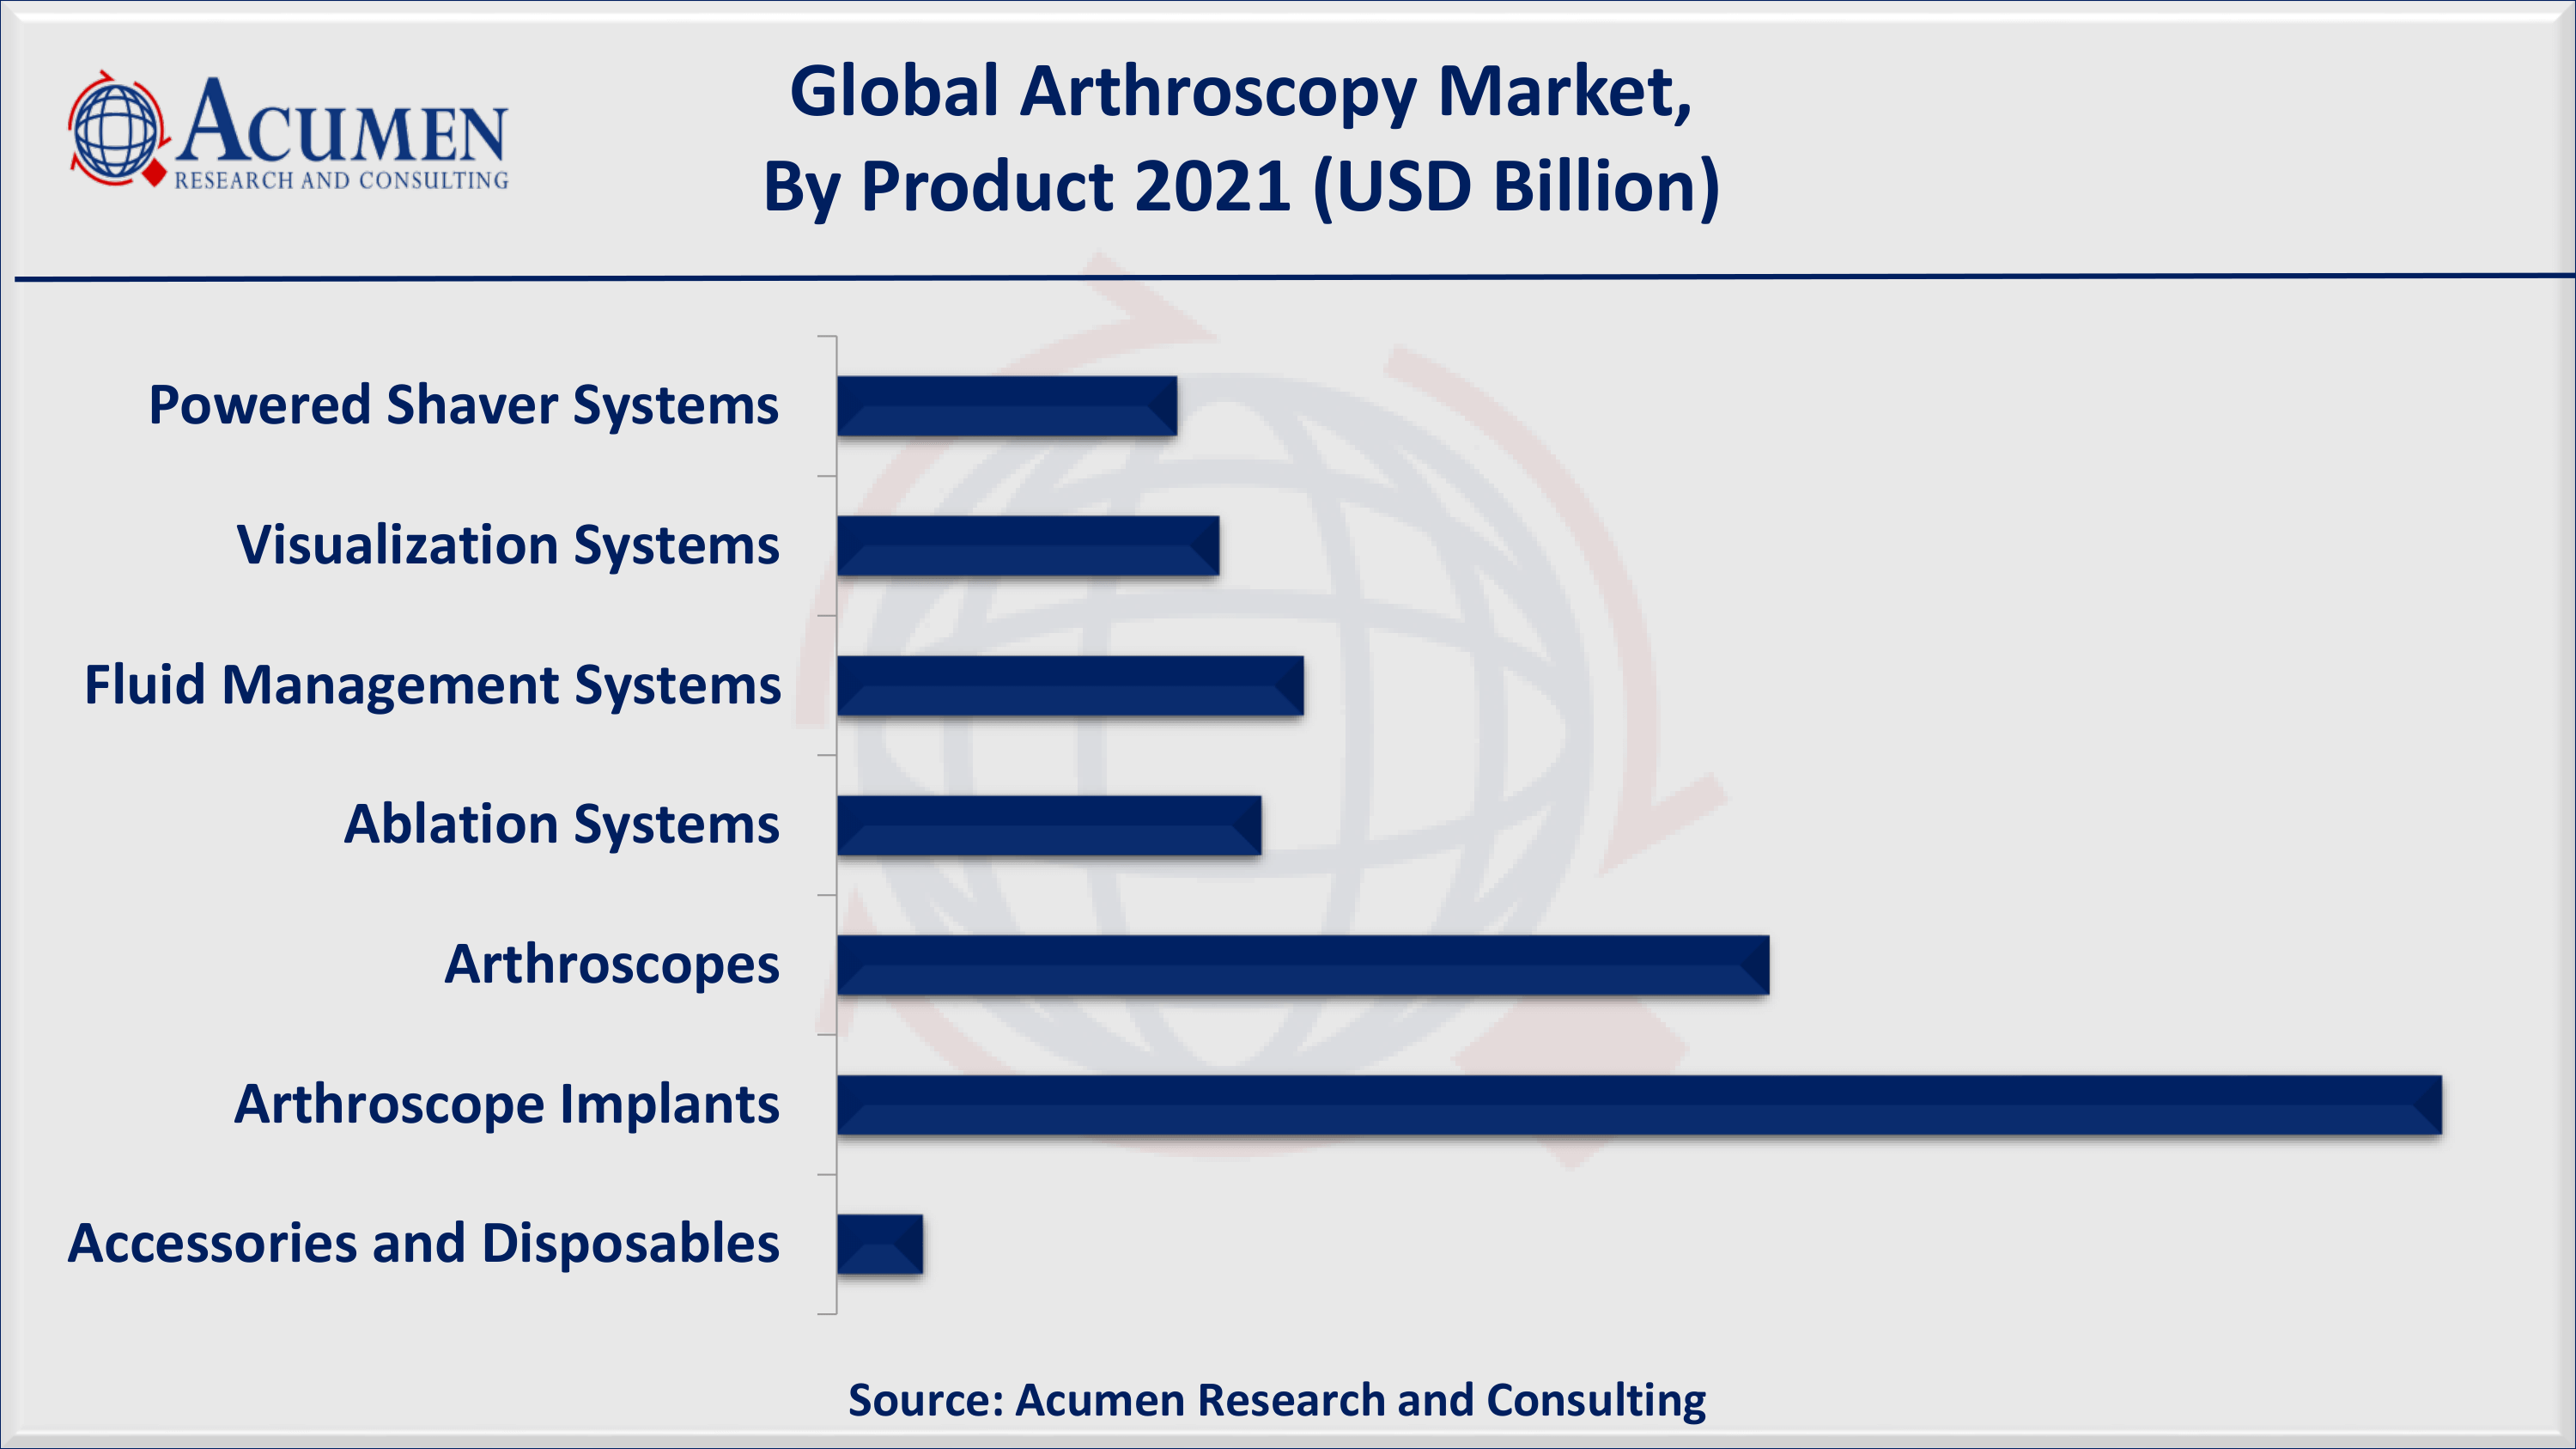 According to the American Academy of Orthopedic Surgeons, around 4 million knee arthroscopy surgeries are performed globally